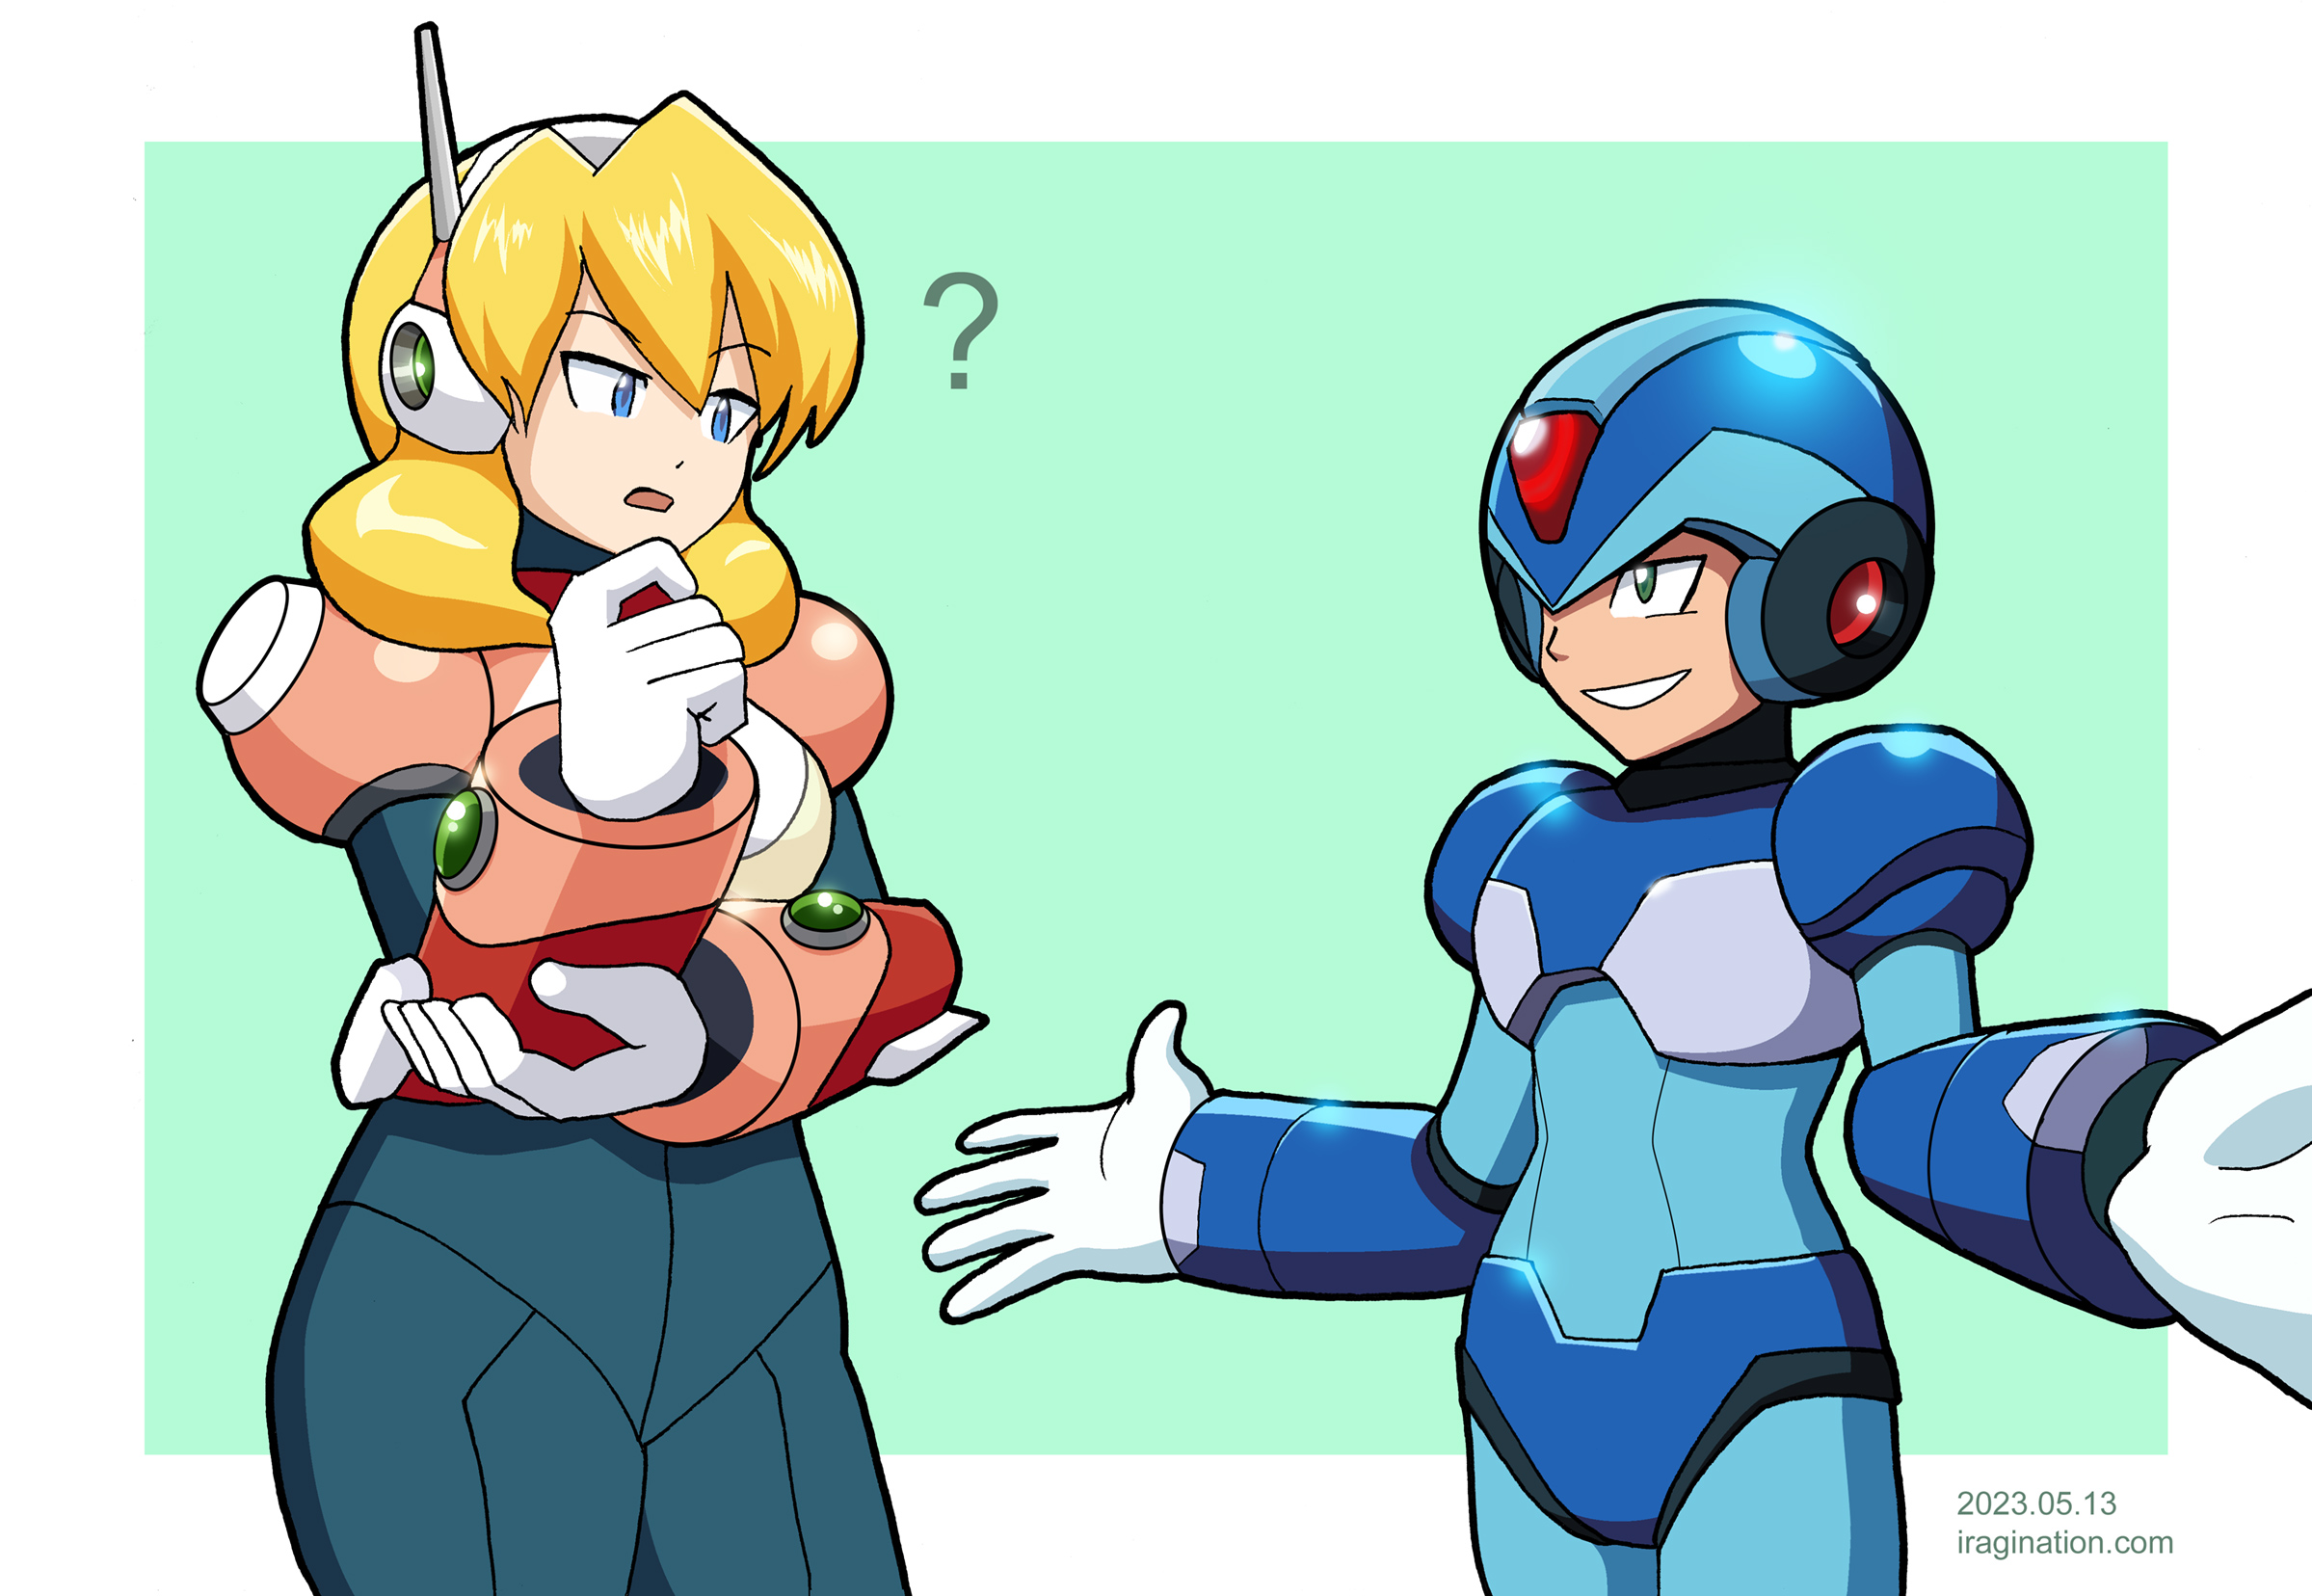 Smiling X
[b]X[/b] is based on the [url=https://www.animate.co.jp/onlyshop/489523/]Mega Man 35th[/url] anniversary artwork released along with some related merchandise. It is worth noting that he’s being depicted using his [b]Mega Man X8[/b] design, which has not been seen since perhaps 2004. 

I don’t remember any instance of promotional or in-game content of him smiling in that game. Such contrast with the original game made me wonder if this is the same X or some alternate version, even with a new personality. 

So, I put this design to the test, proportions and all, along with [b]Alia[/b] in a more classic style, and see how they fared together. For a better look of what I am talking about perhaps you should check the [url=https://www.iragination.com/illust/displayimage.php?pid=594]full body sketch[/url].

I guess we'll have to wait to see if the other Mega Man X characters get the same treatment, or if it's just a one-off commemorative design.

Mega Man X © CAPCOM
Keywords: x alia